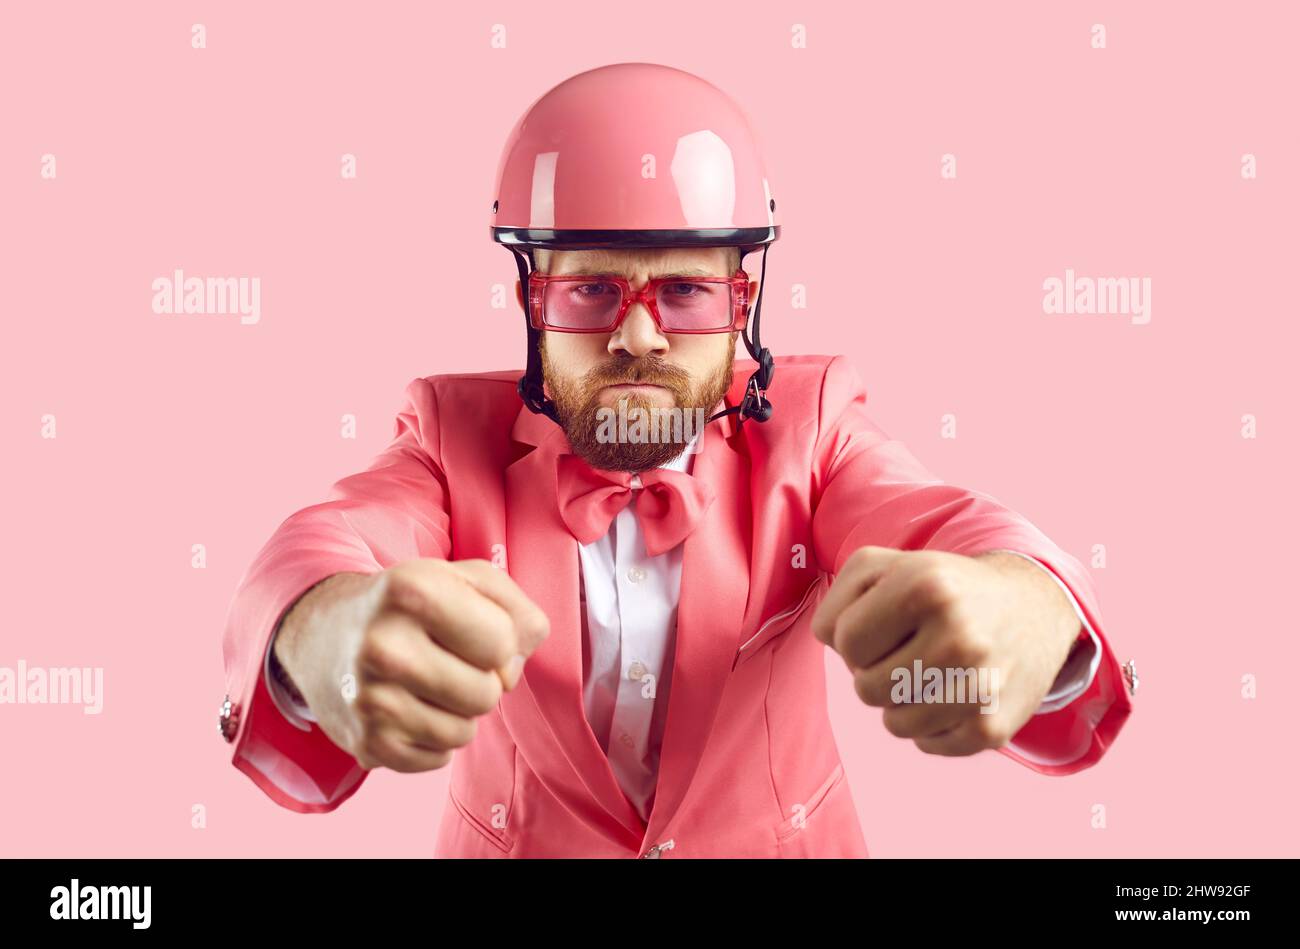 Funny man in pink suit and helmet driving invisible car with angry face expression Stock Photo